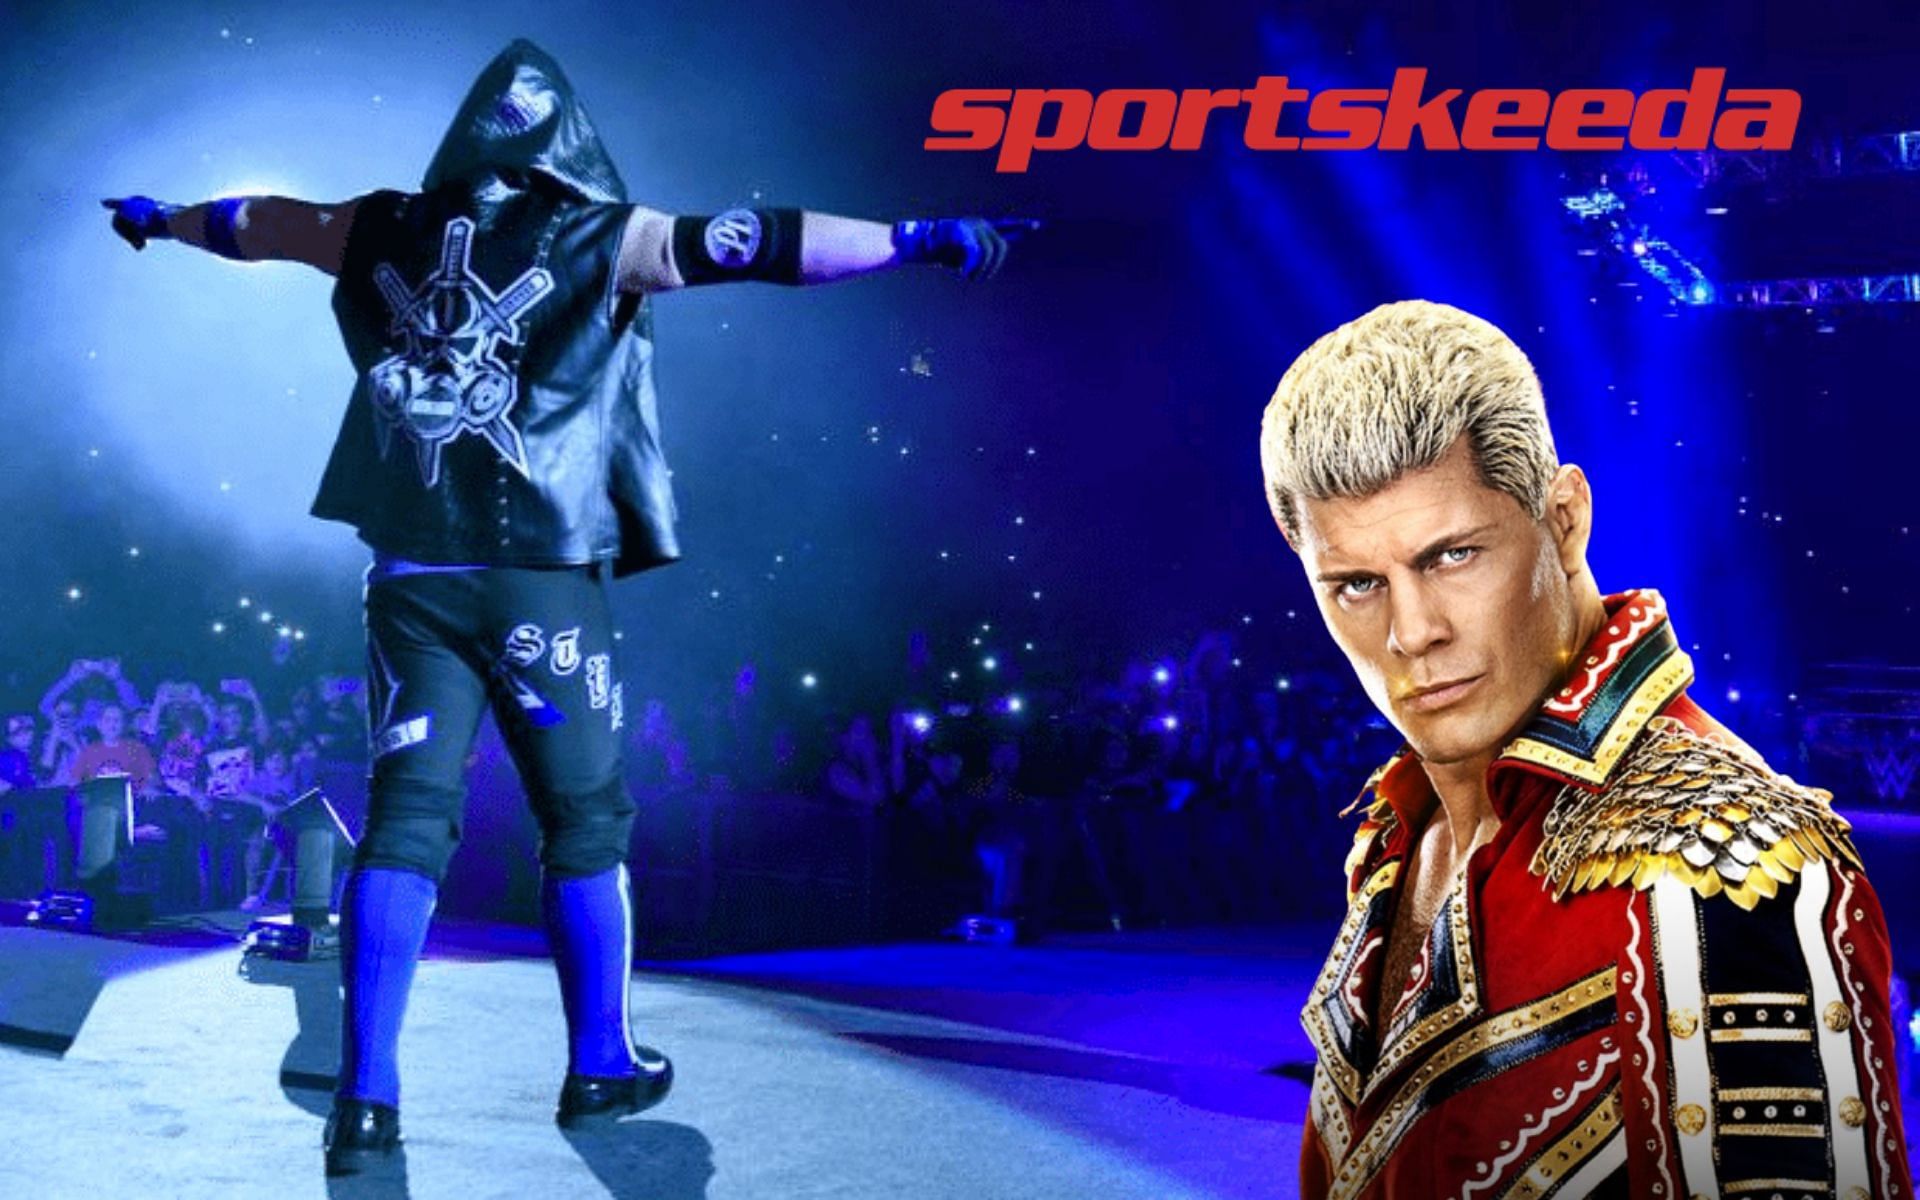 AJ Styles and Cody Rhodes are destined for a classic showdown!